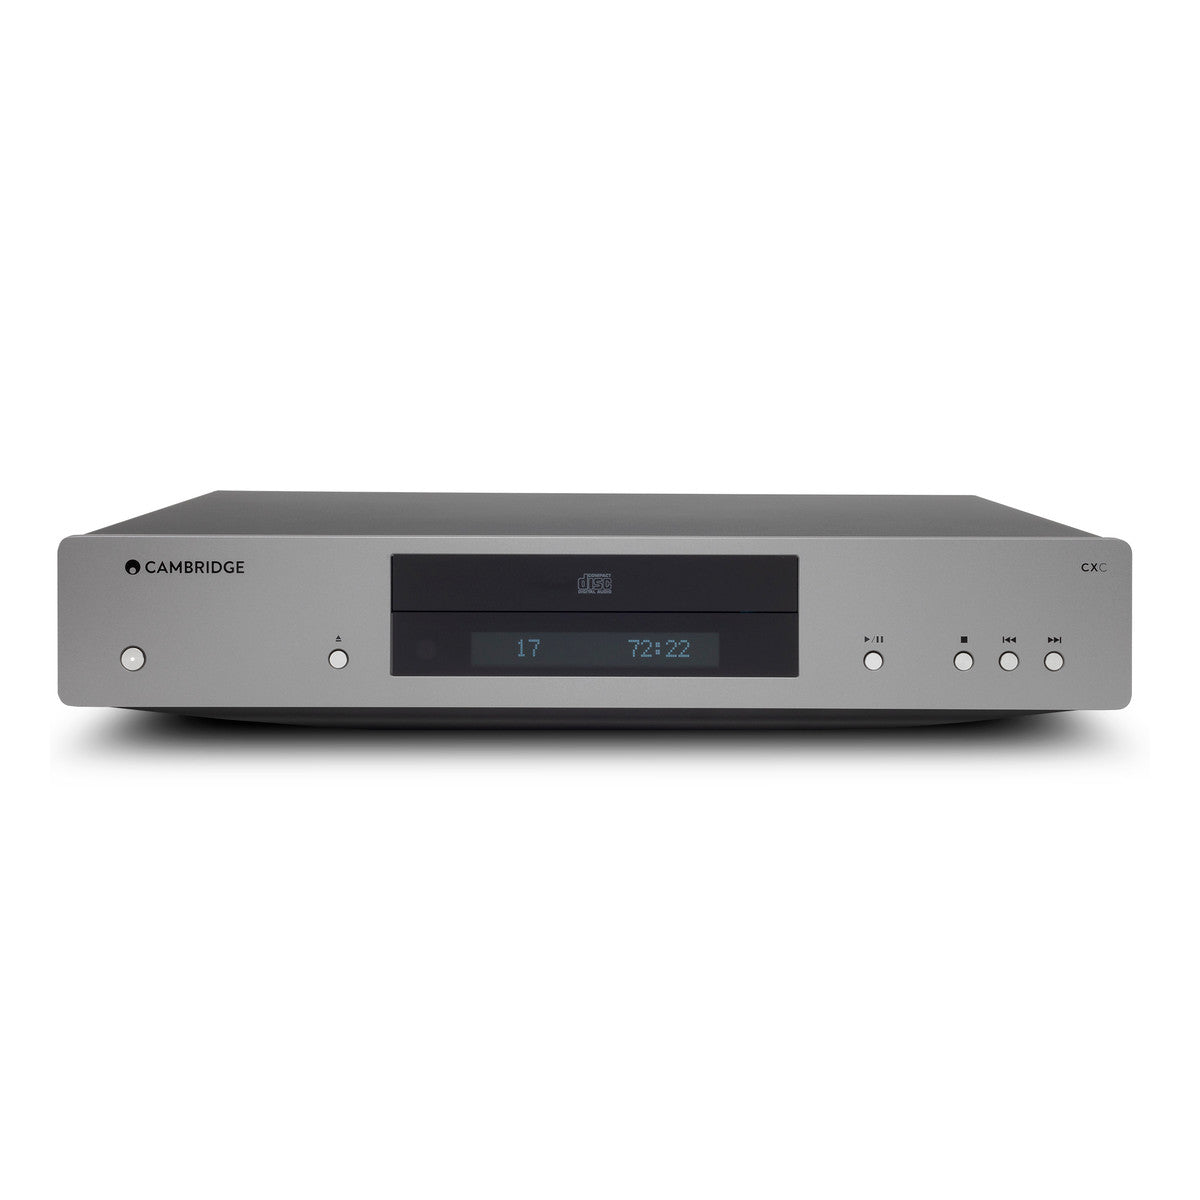 The Best Budget CD Player, now made - Marantz Philippines